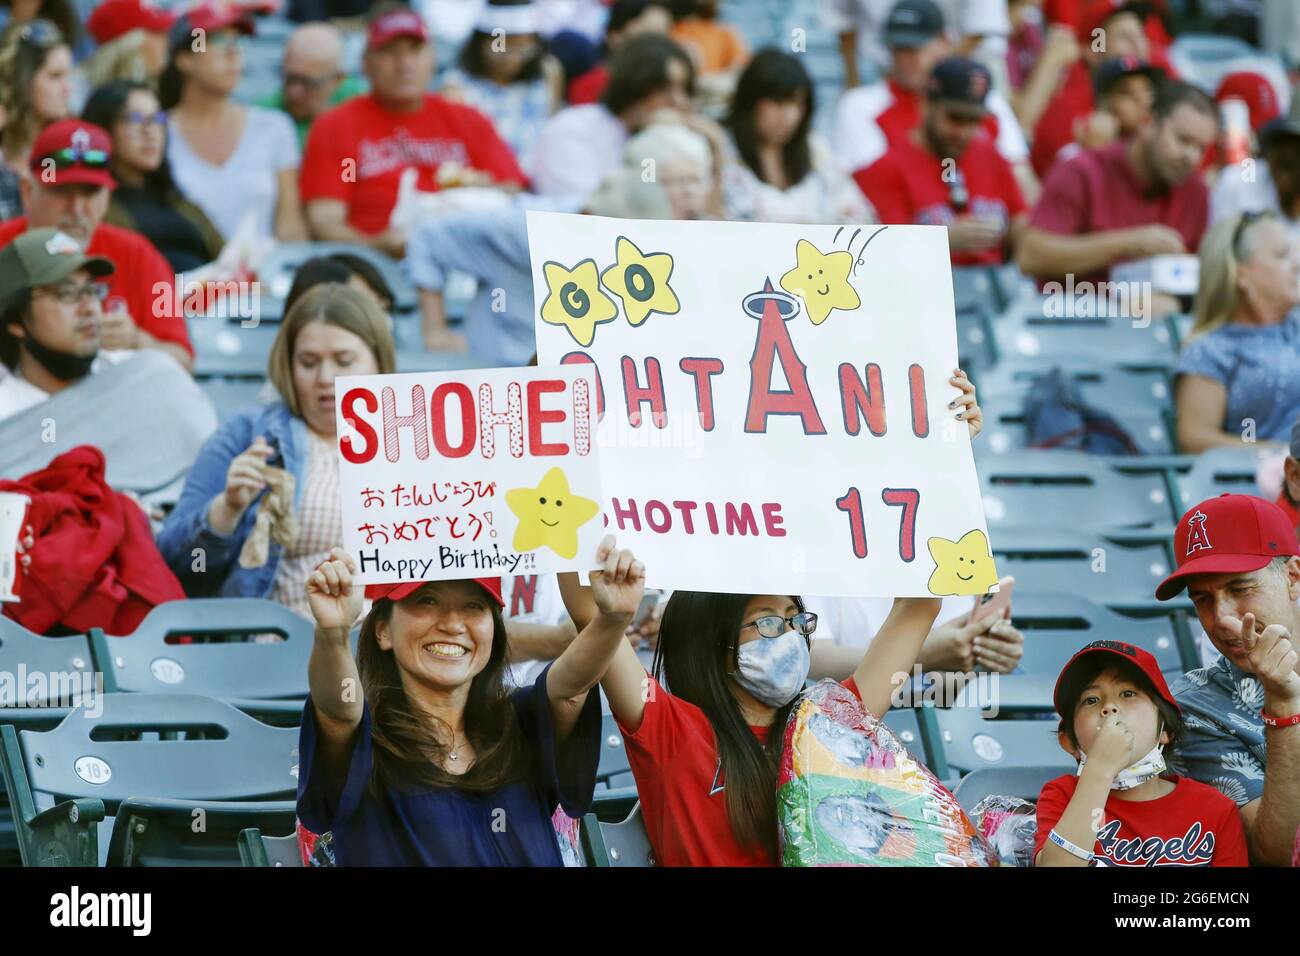 MLB playoffs: Best fan signs and celebrations